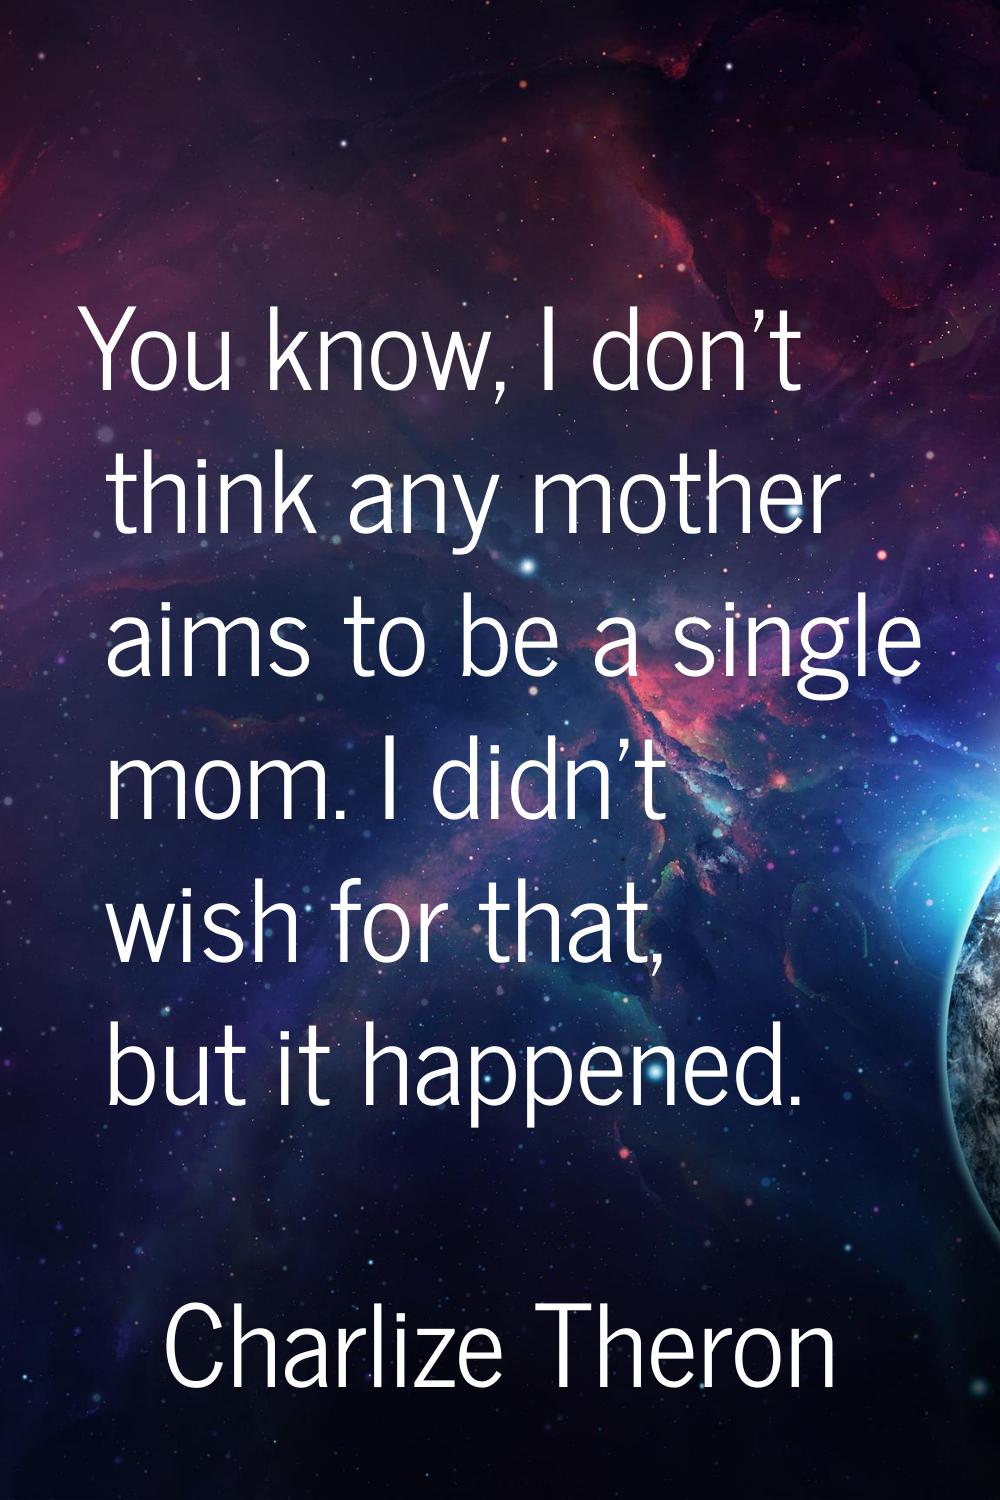 You know, I don't think any mother aims to be a single mom. I didn't wish for that, but it happened